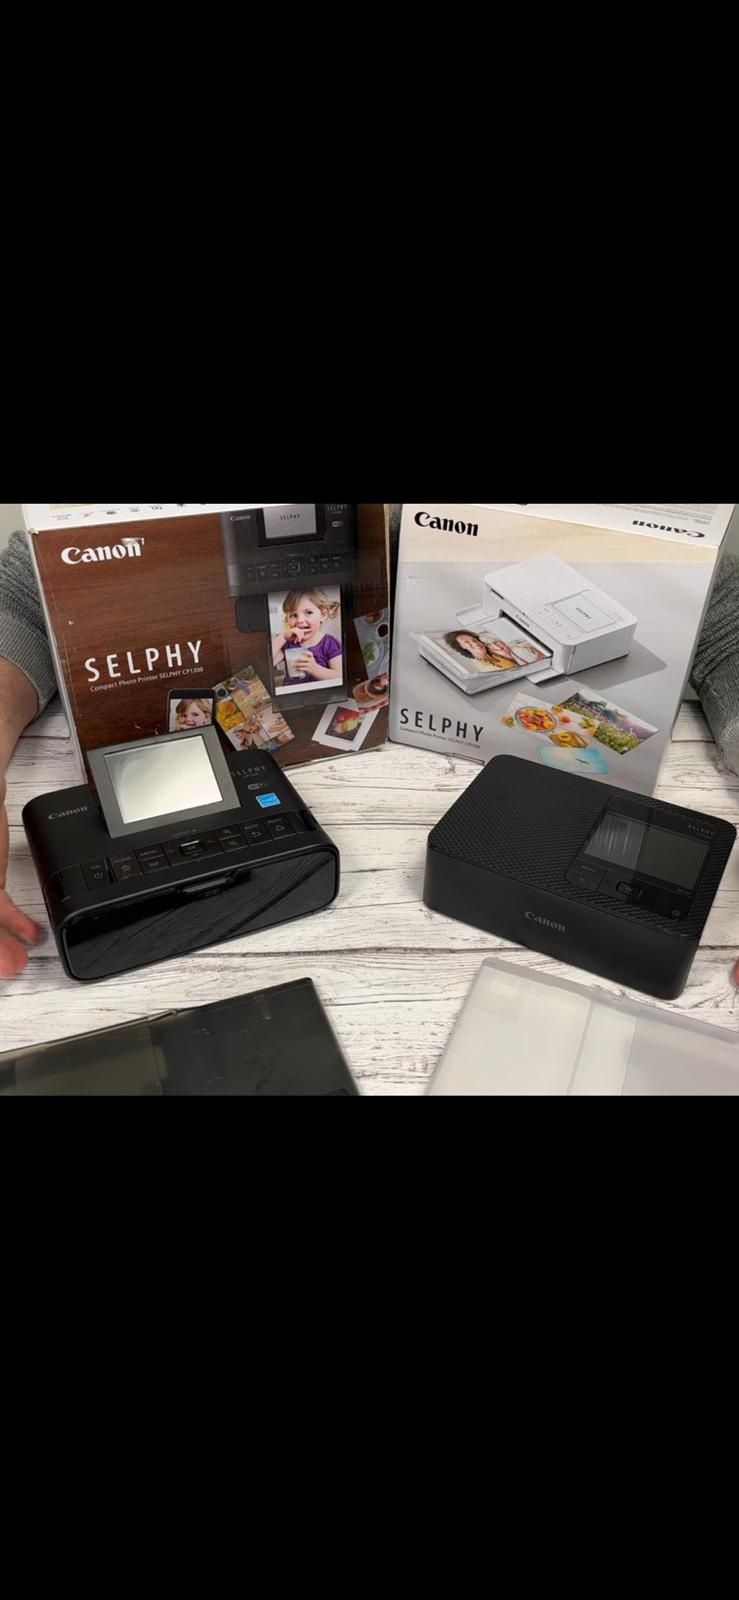 Canon Selphy 1500